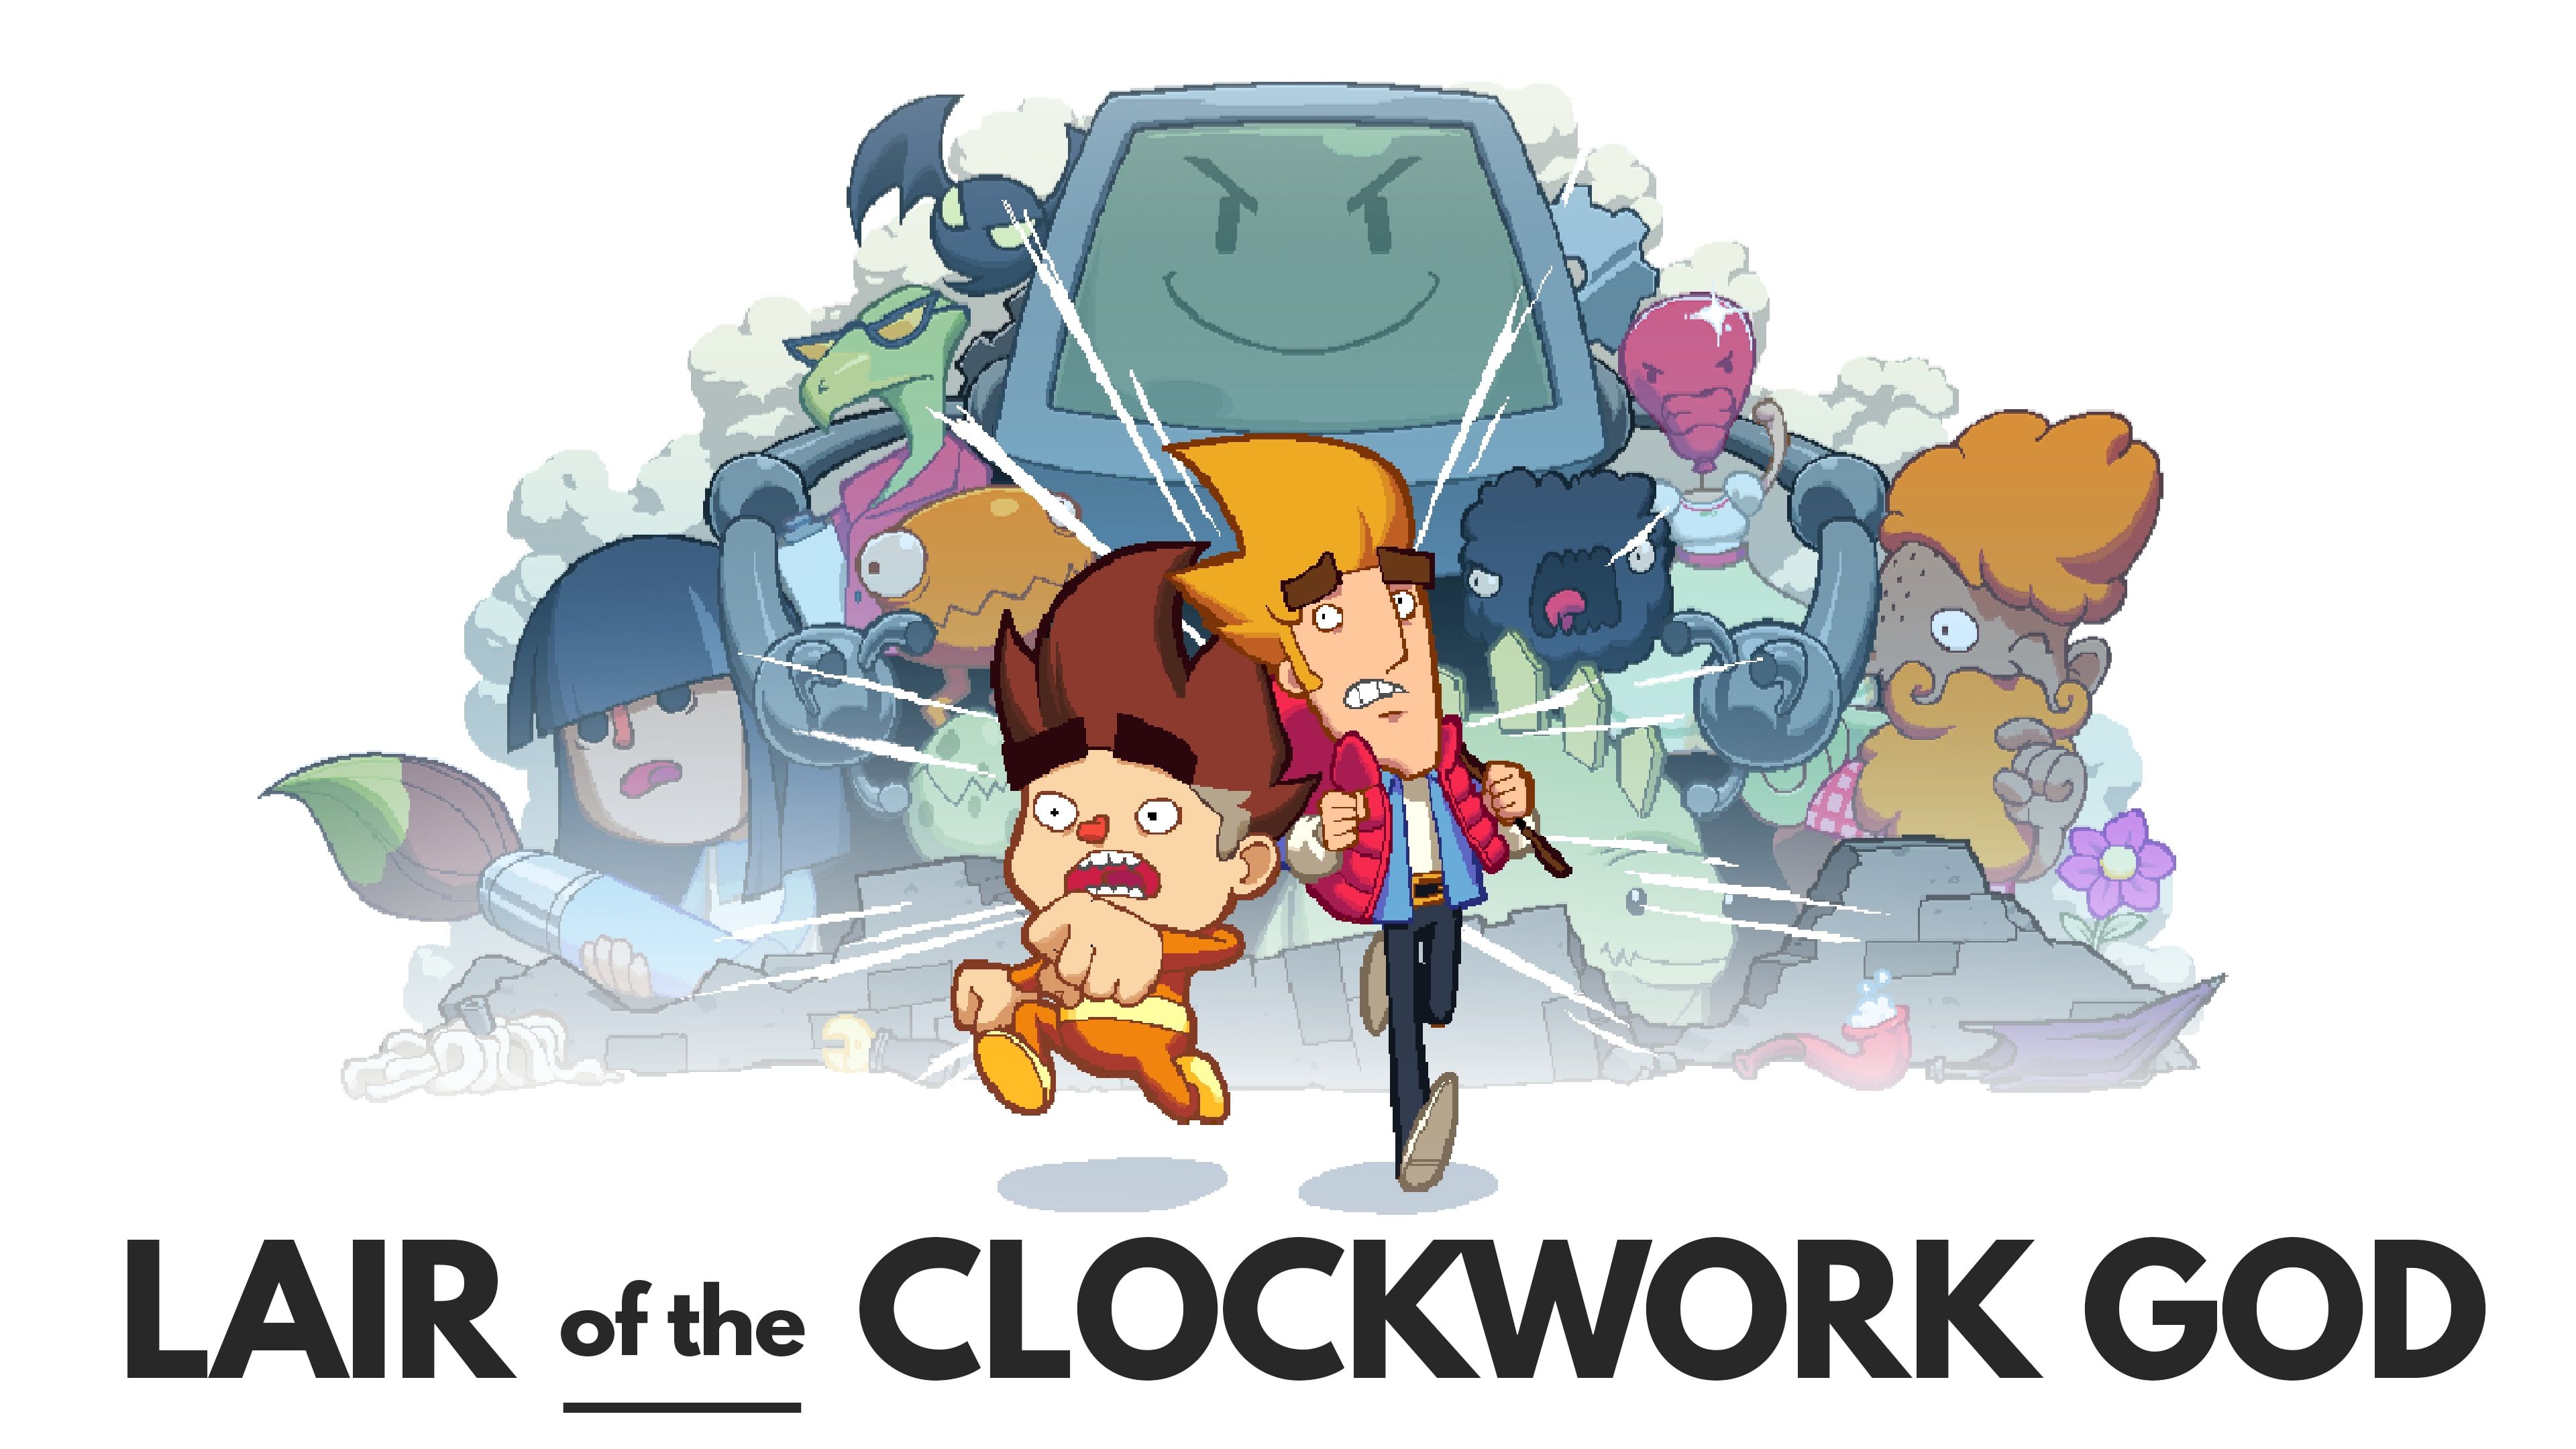 Lair of the Clockwork God cover image